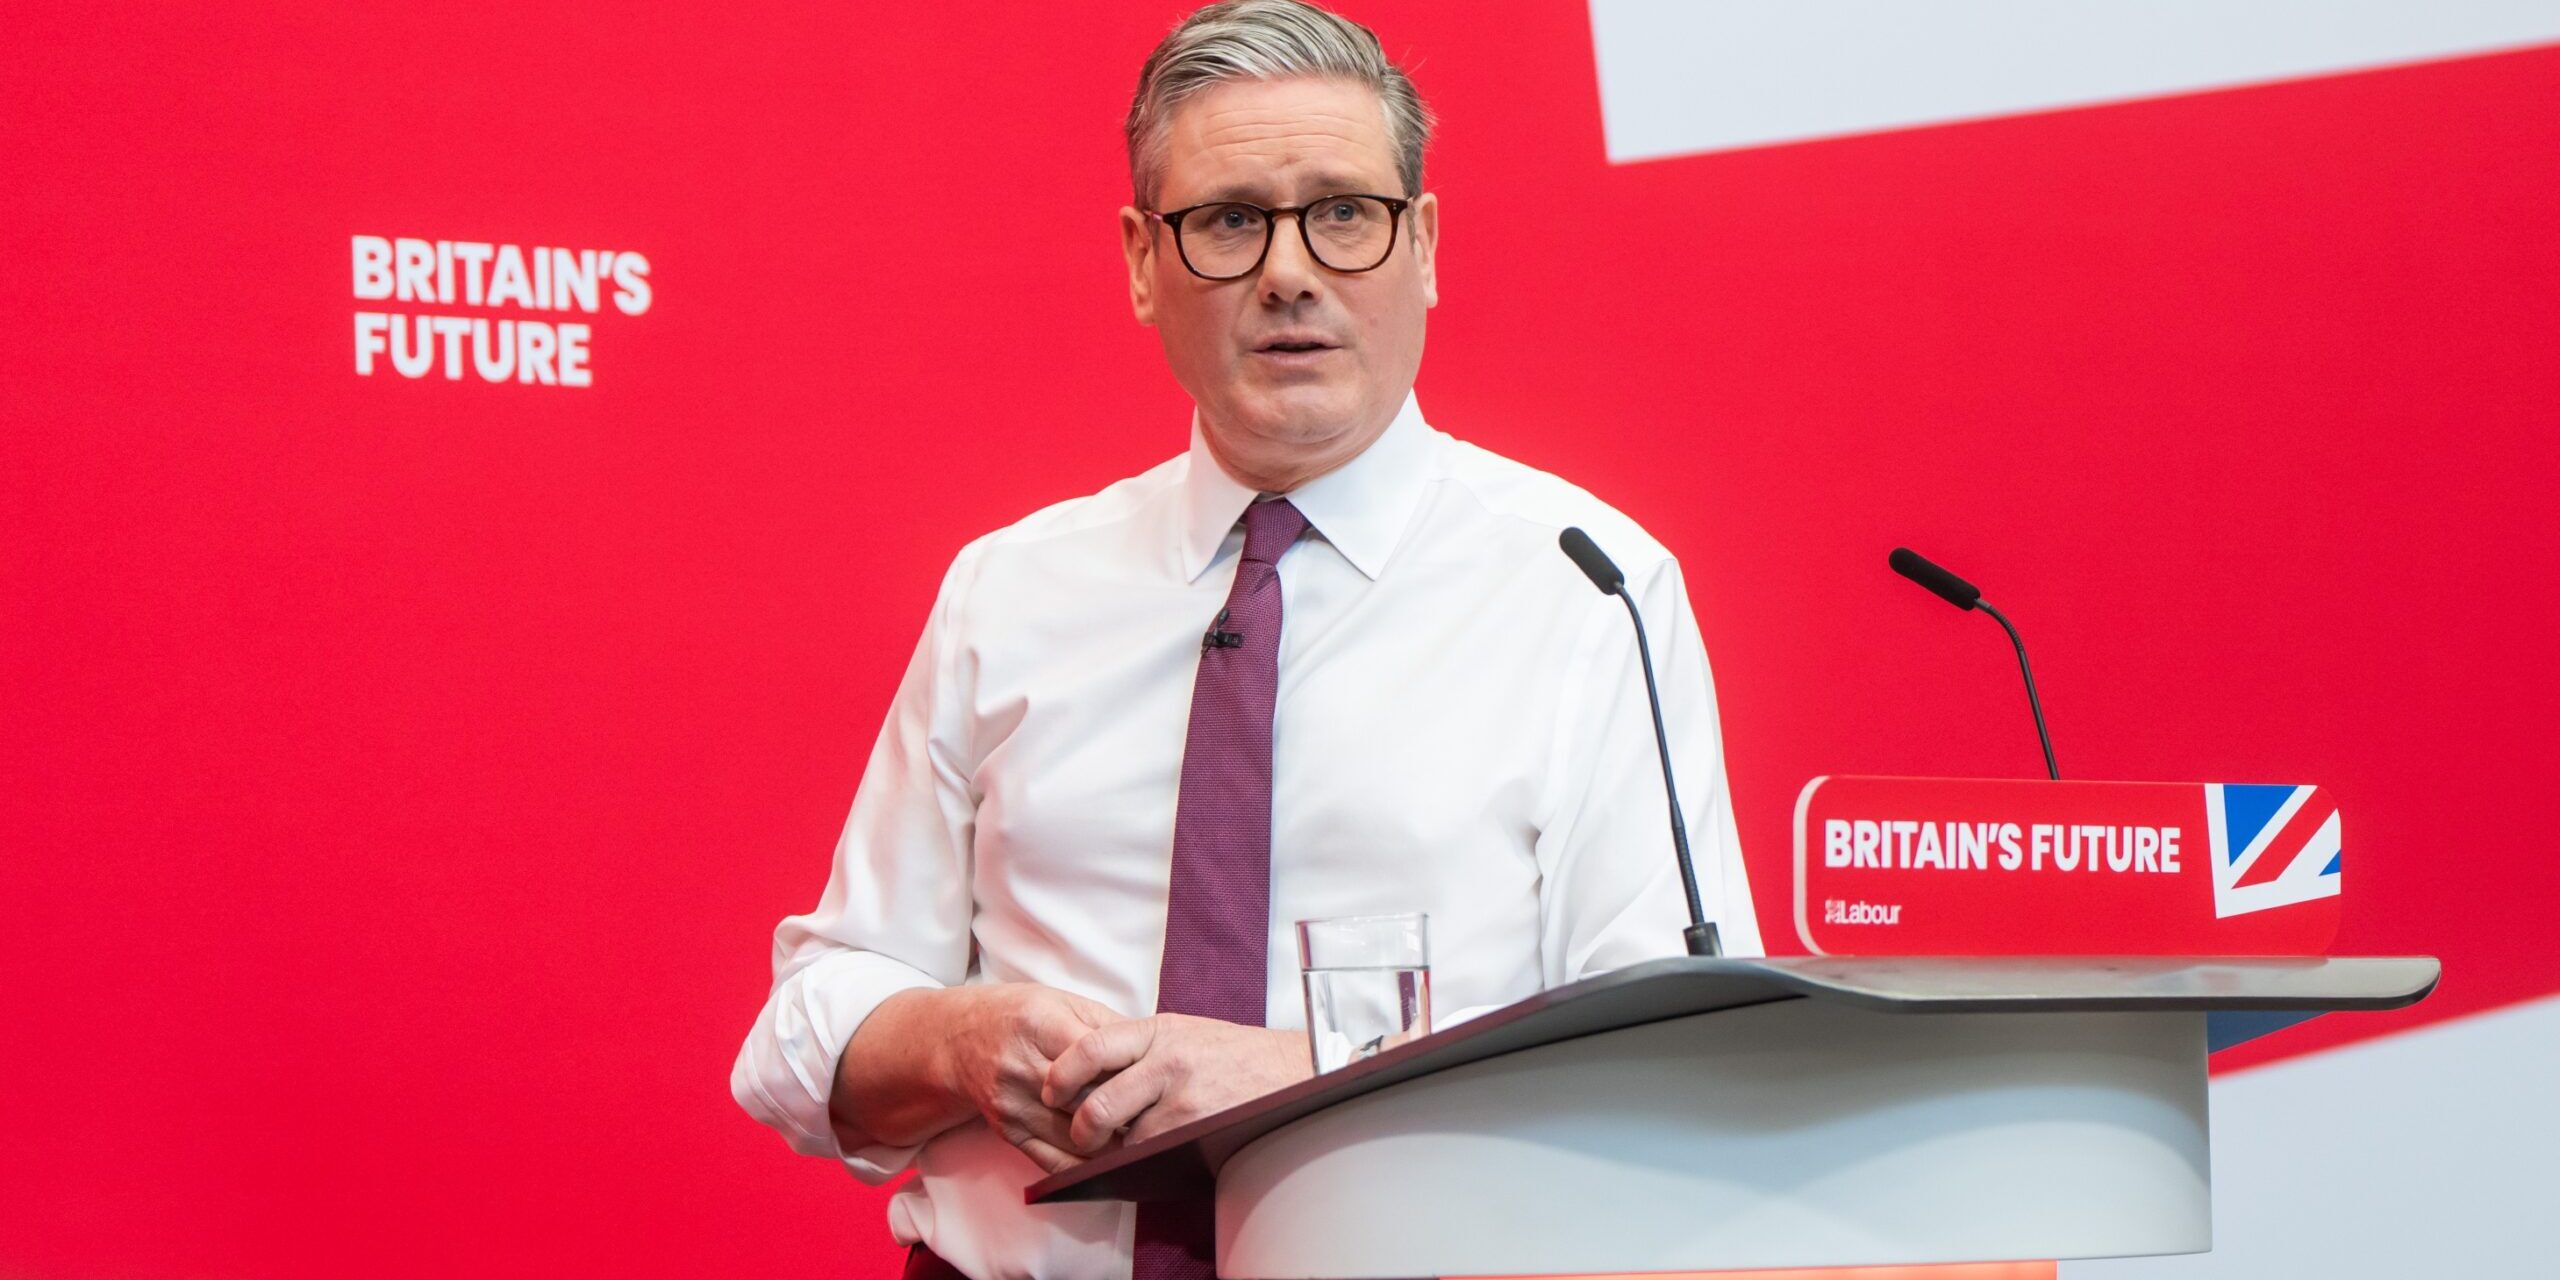 Keir Starmer standing at a podium in front of a red background with the phrase 'Britain's Future' written on it